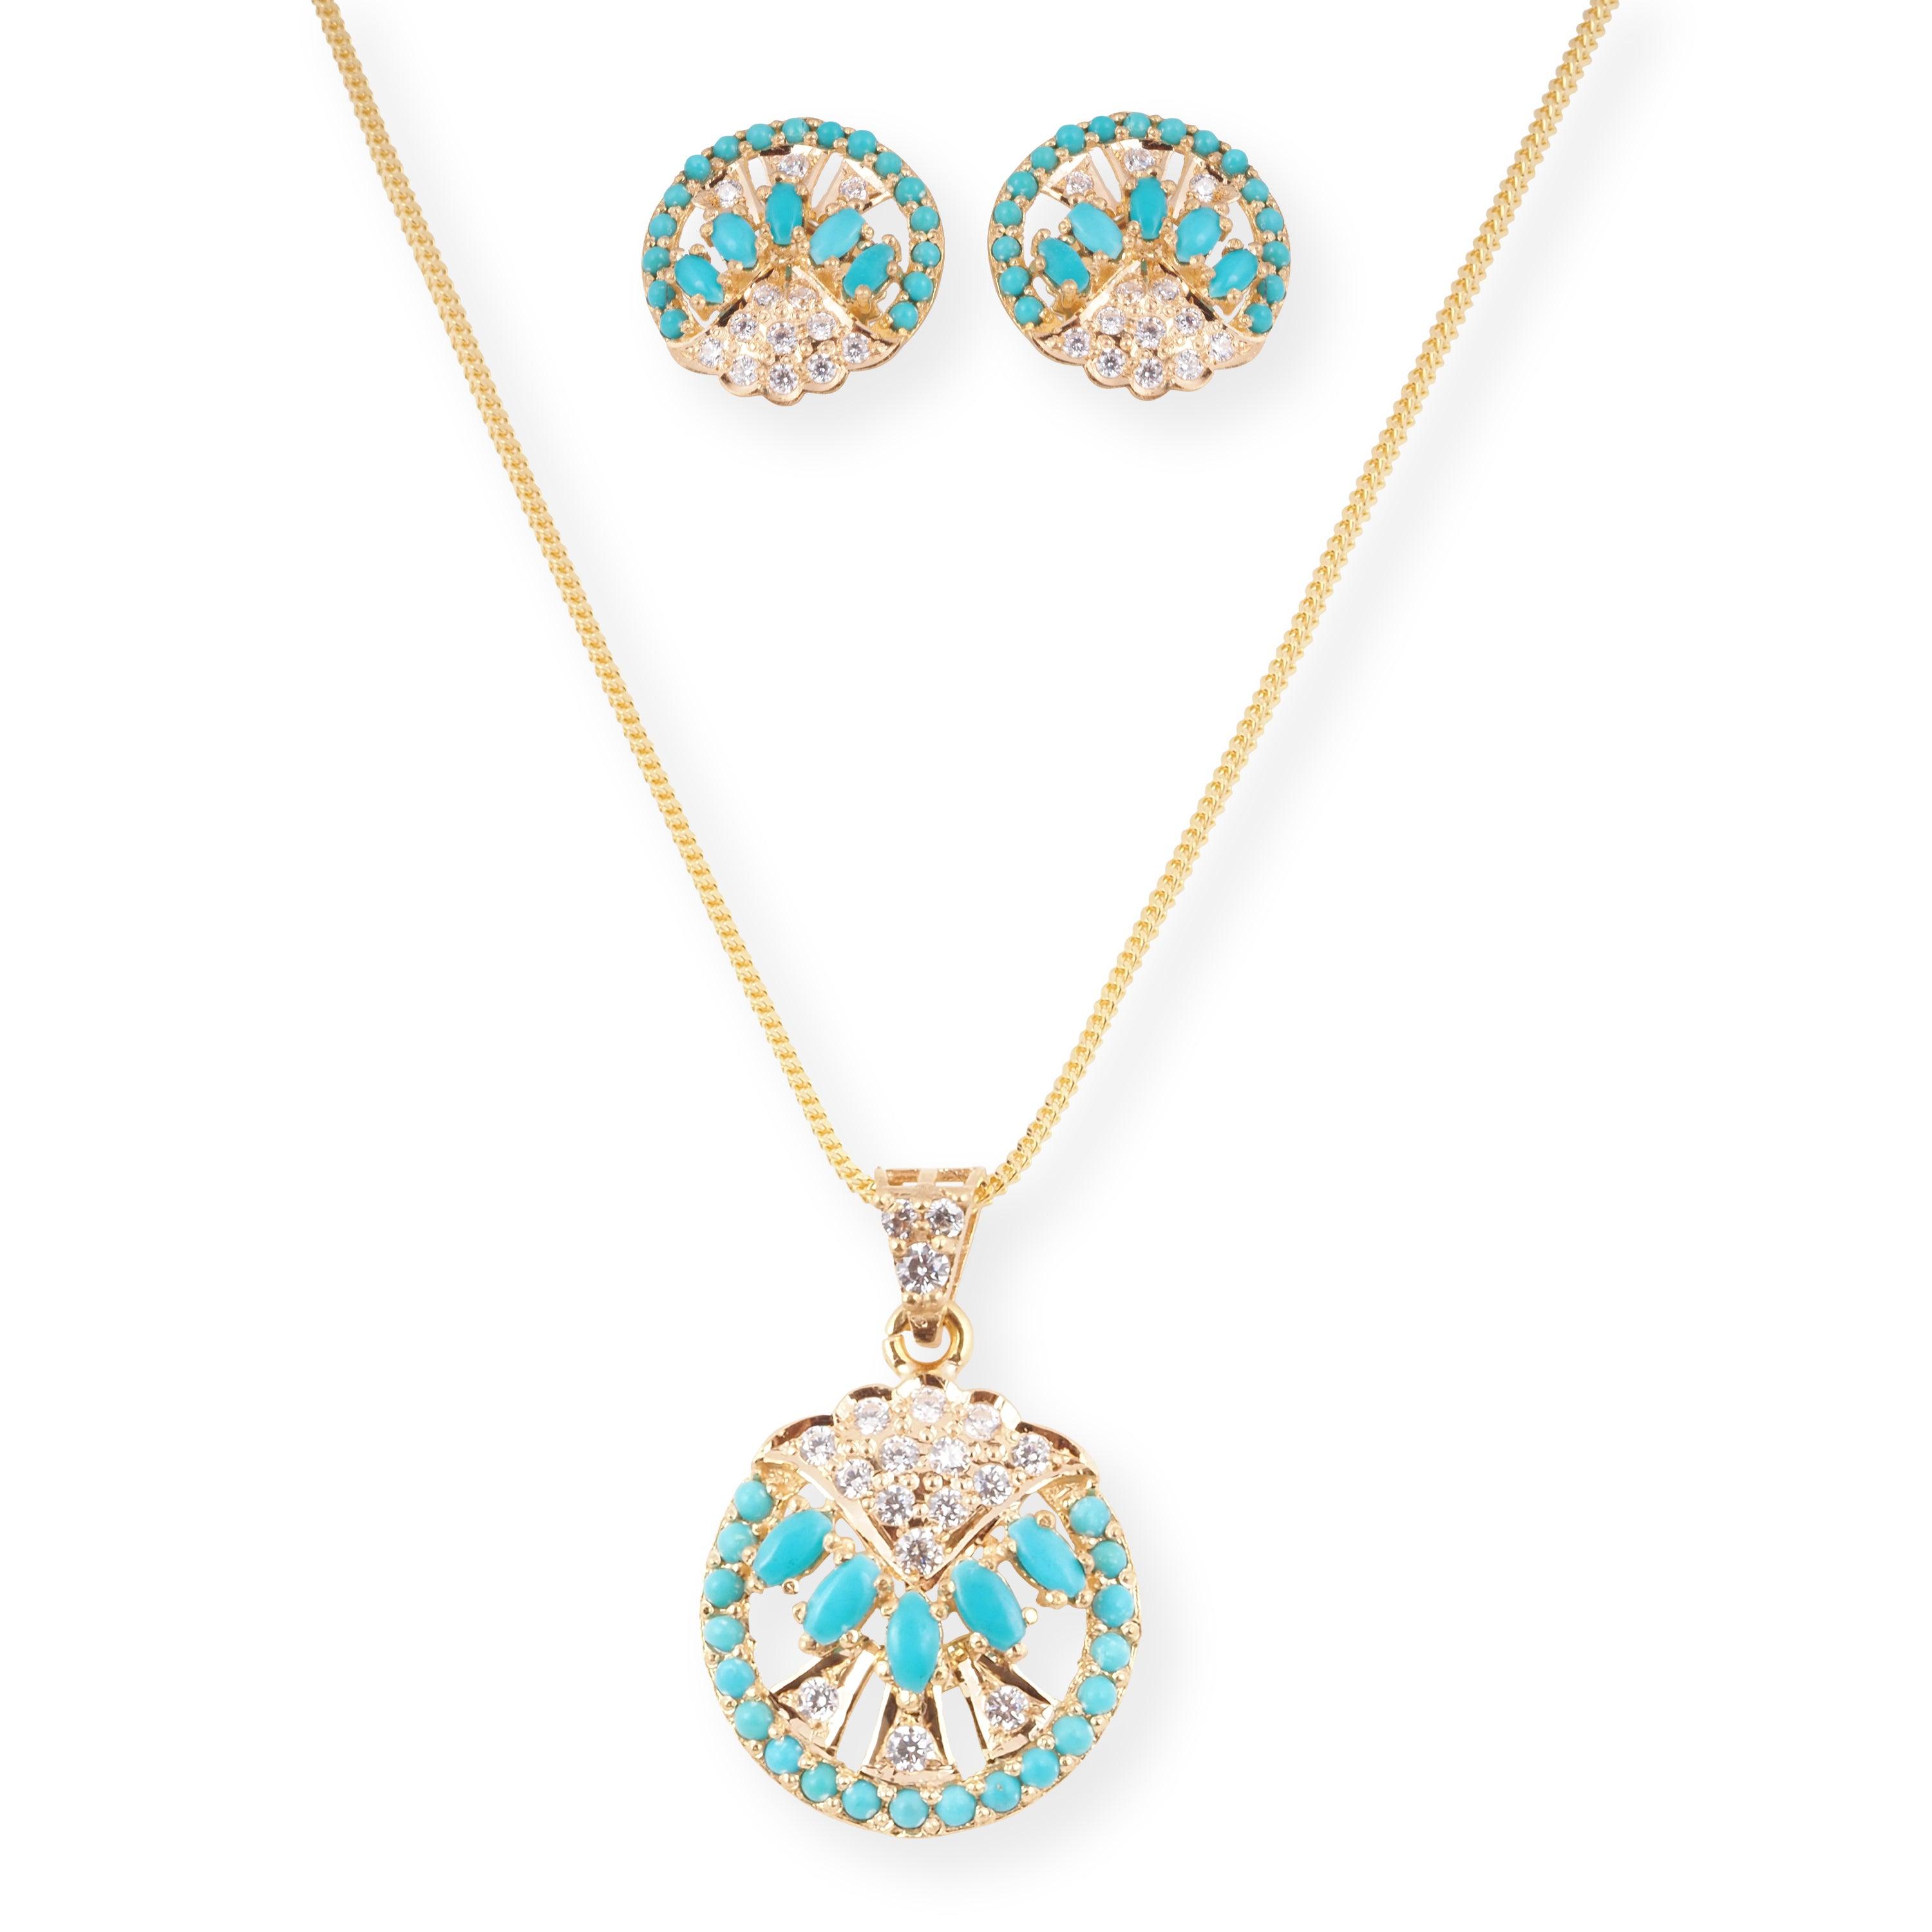 22ct Gold Set with Turquoise and Cubic Zirconia Stones (Pendant + Chain + Earrings) P-8008 E-8008A - Minar Jewellers